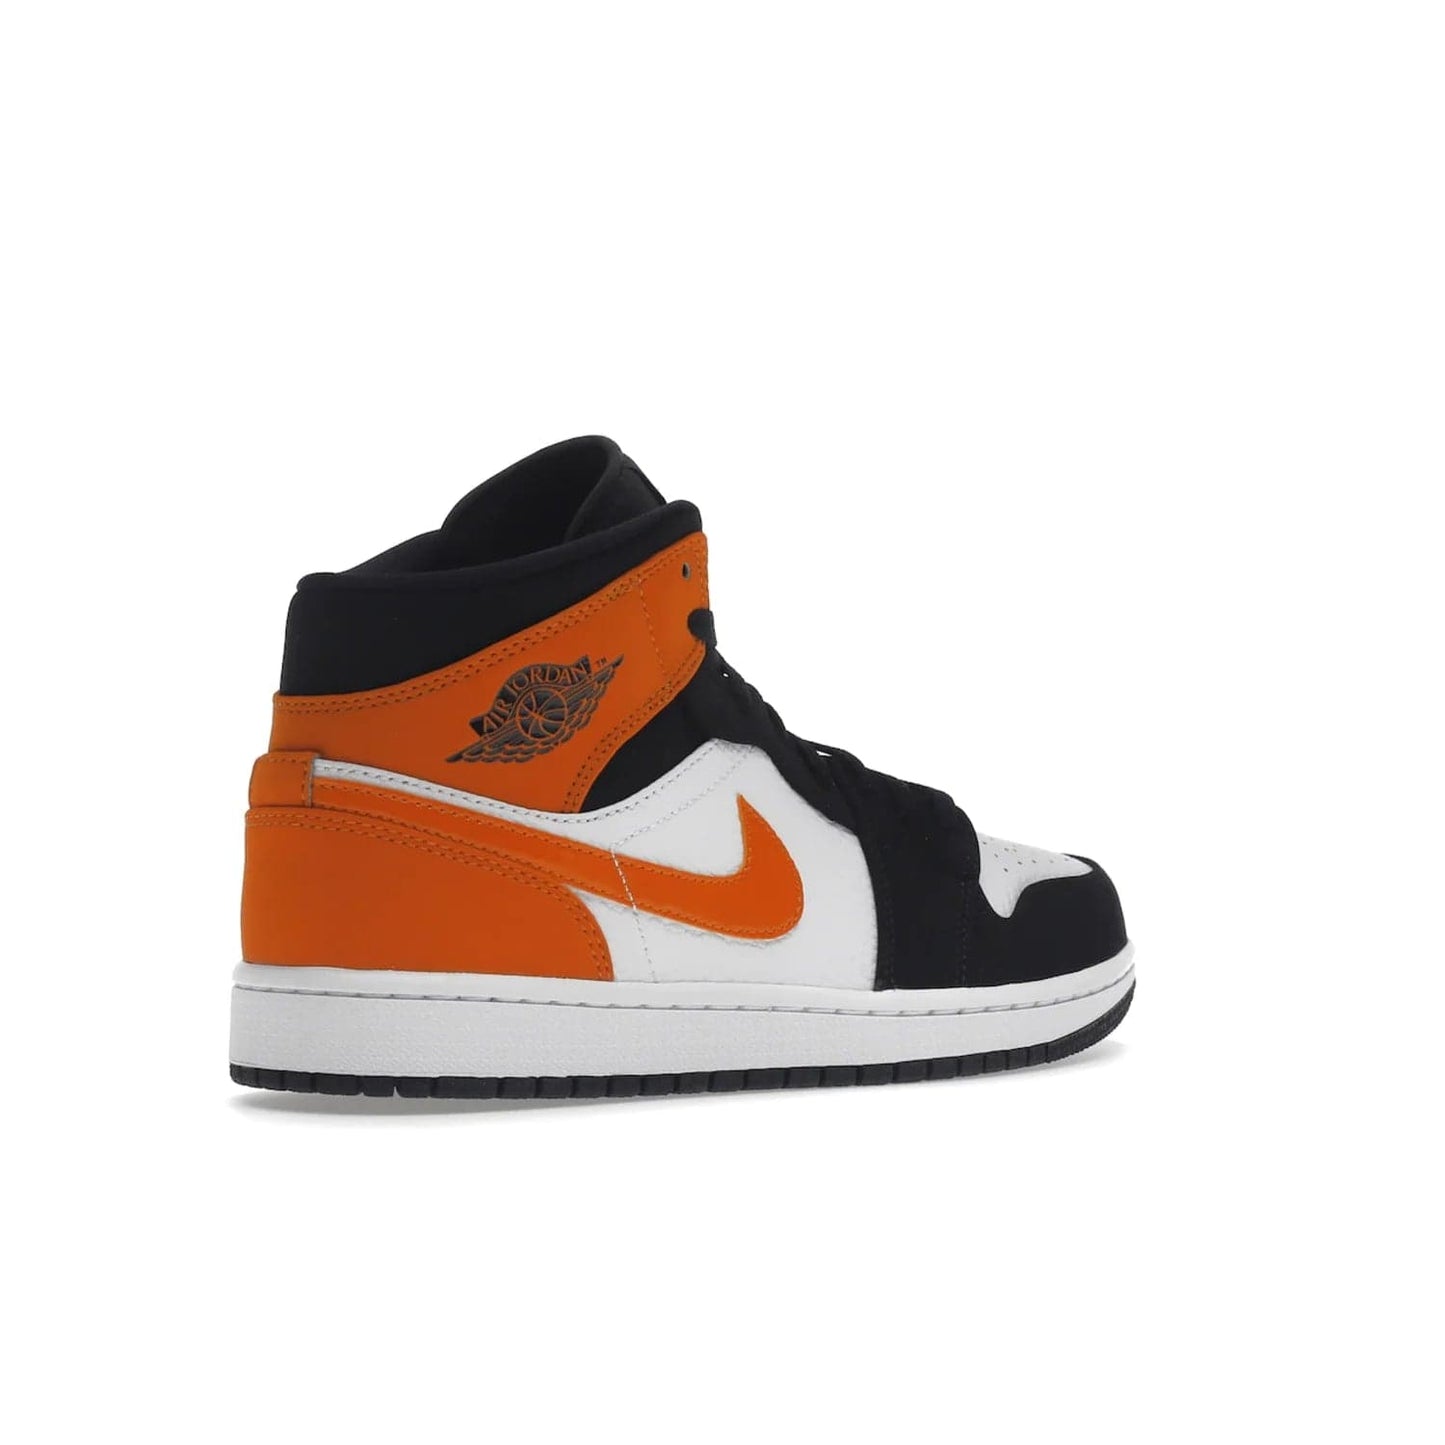 Jordan 1 Mid Shattered Backboard - Image 33 - Only at www.BallersClubKickz.com - The Air Jordan 1 Mid Shattered Backboard offers a timeless Black/White-Starfish colorway. Classic Swoosh logo and AJ insignia plus a shatterd backboard graphic on the insole. Get your pair today!